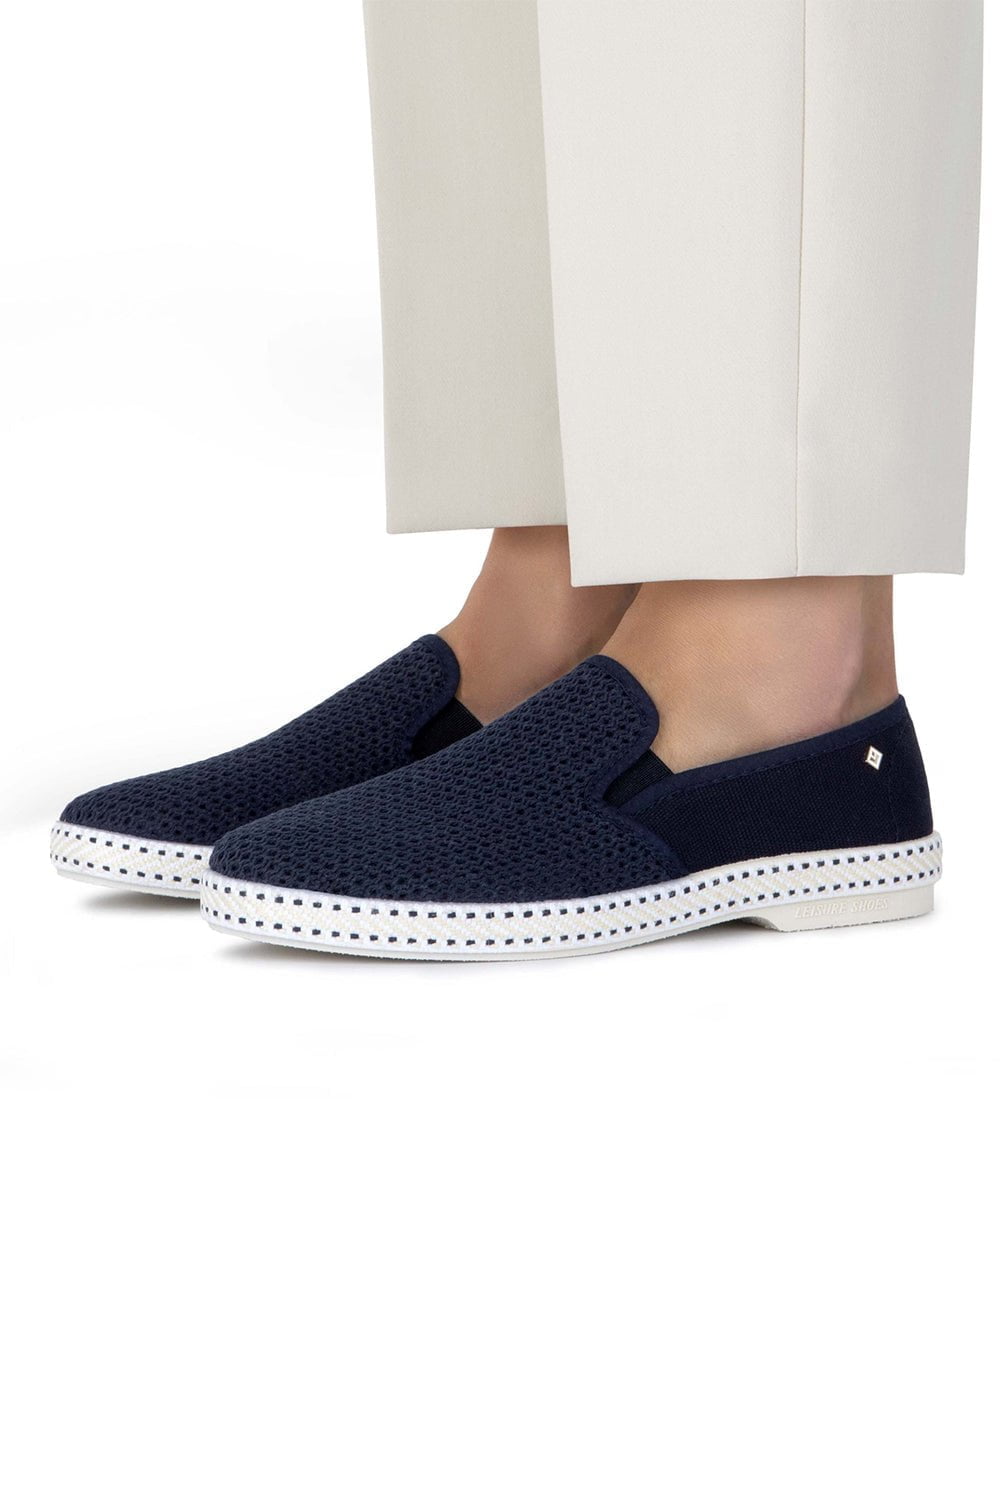 RIVIERAS-Classic Canvas & Mesh Navy Slip On Loafer-